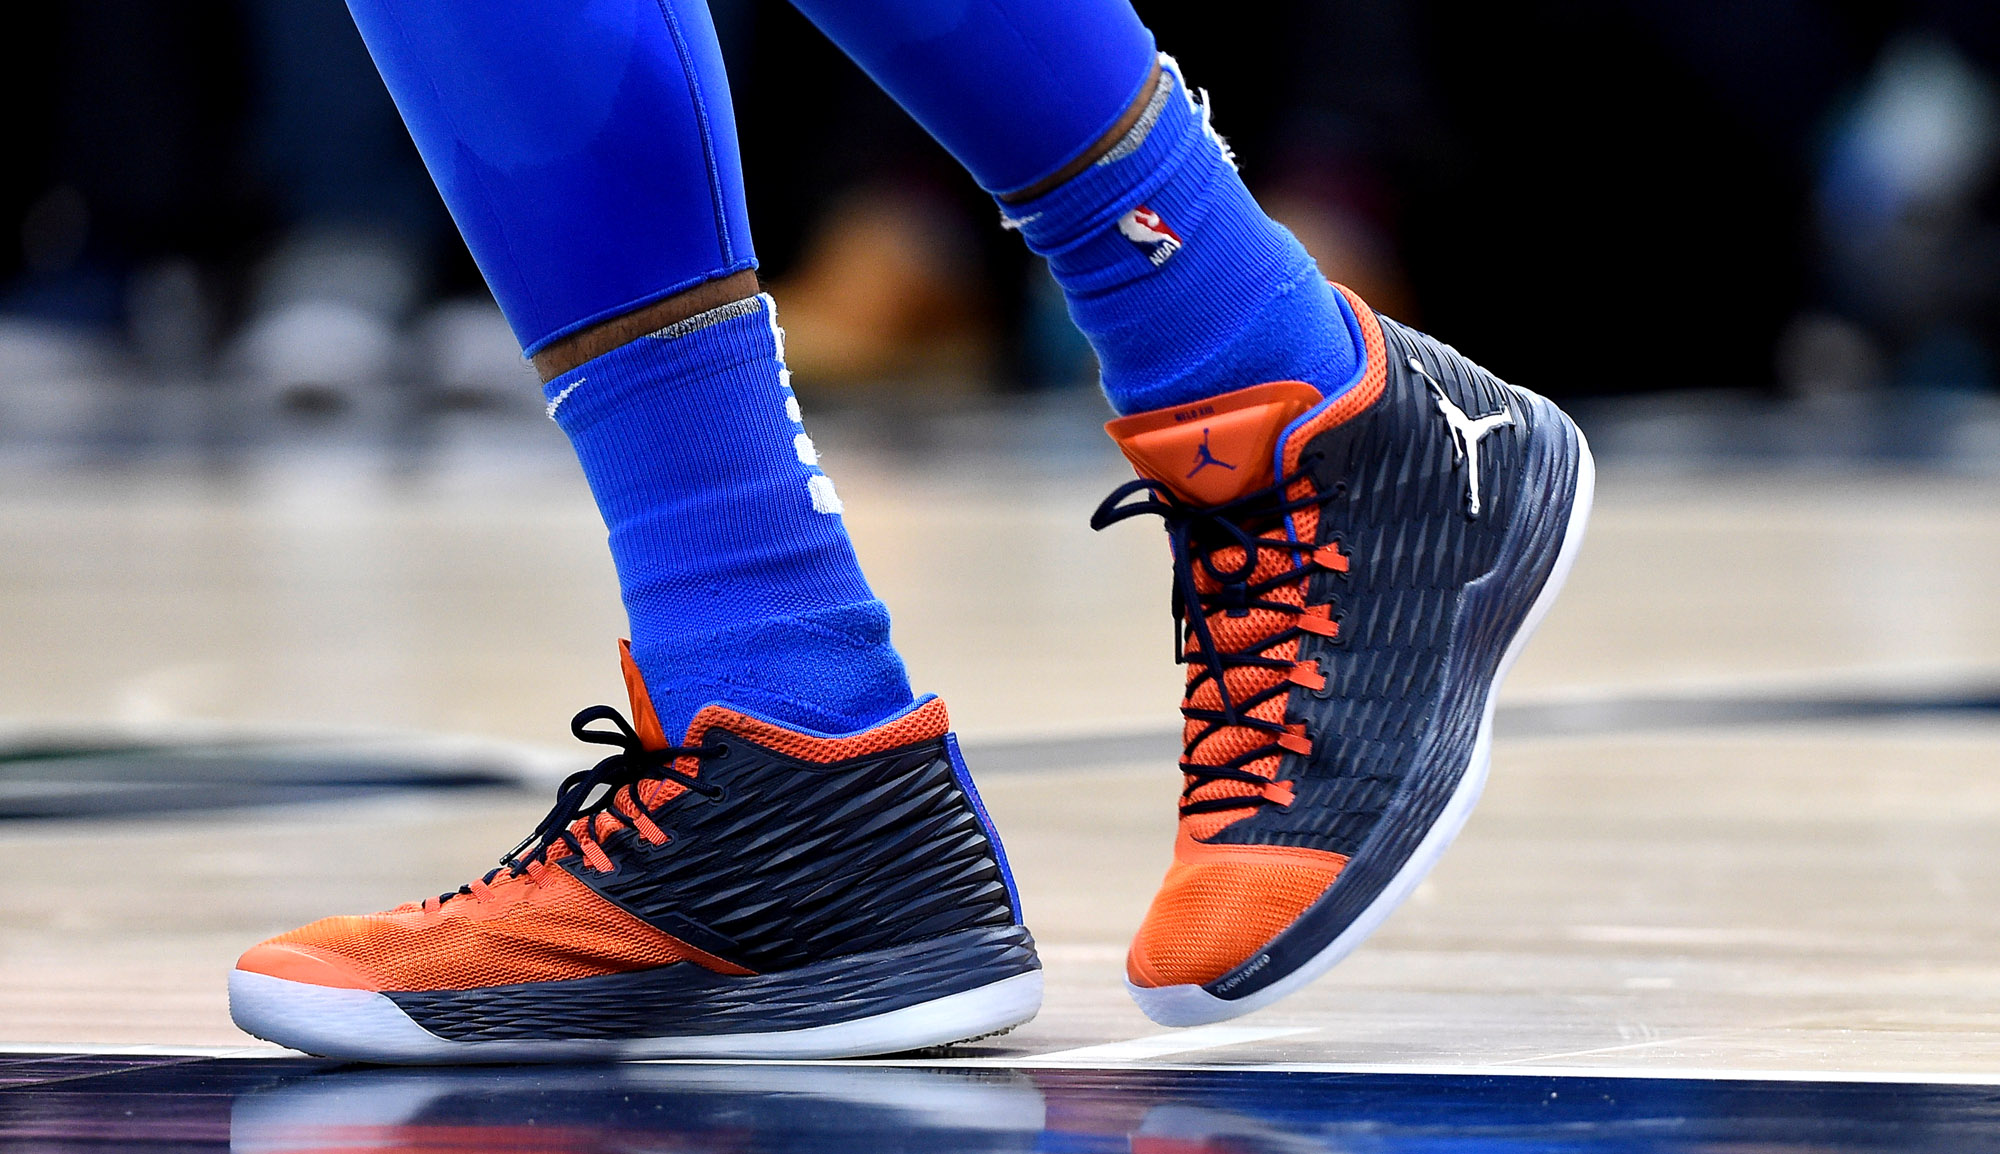 The History of Carmelo Anthony's Jordan Brand Signature Line